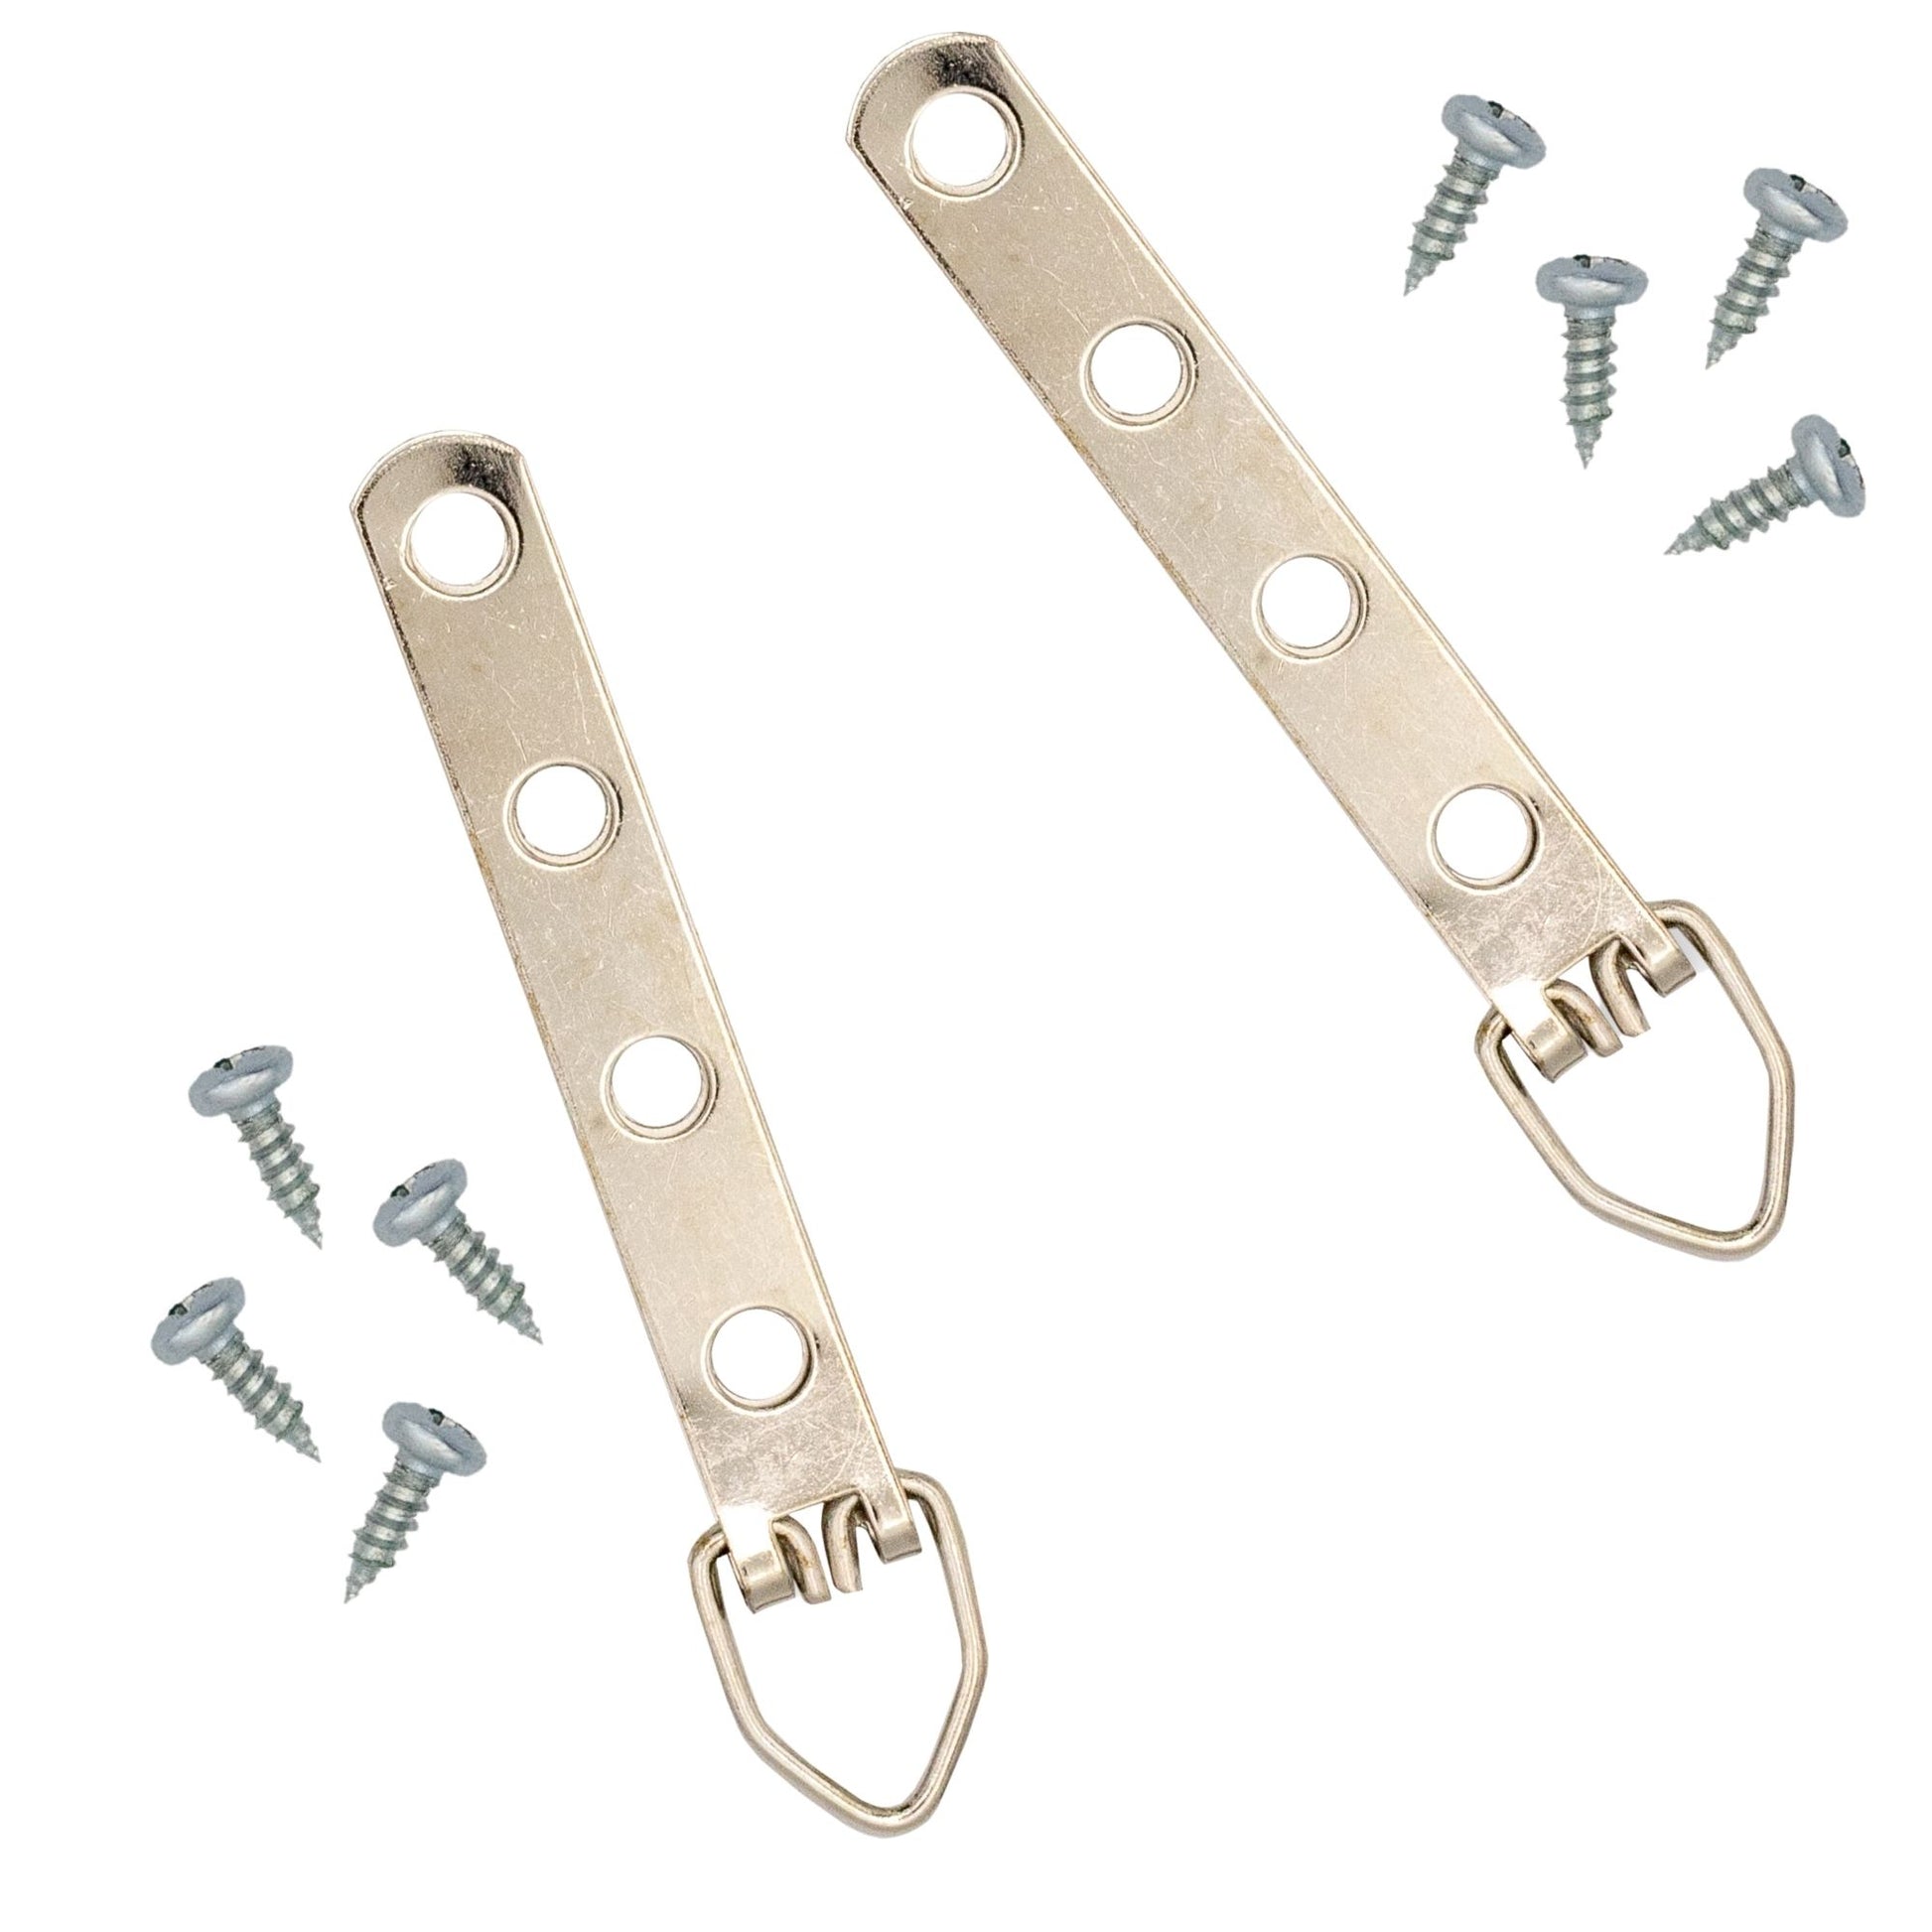 4 Hole Zinc-Plated Heavy Duty D Ring Picture Hanger